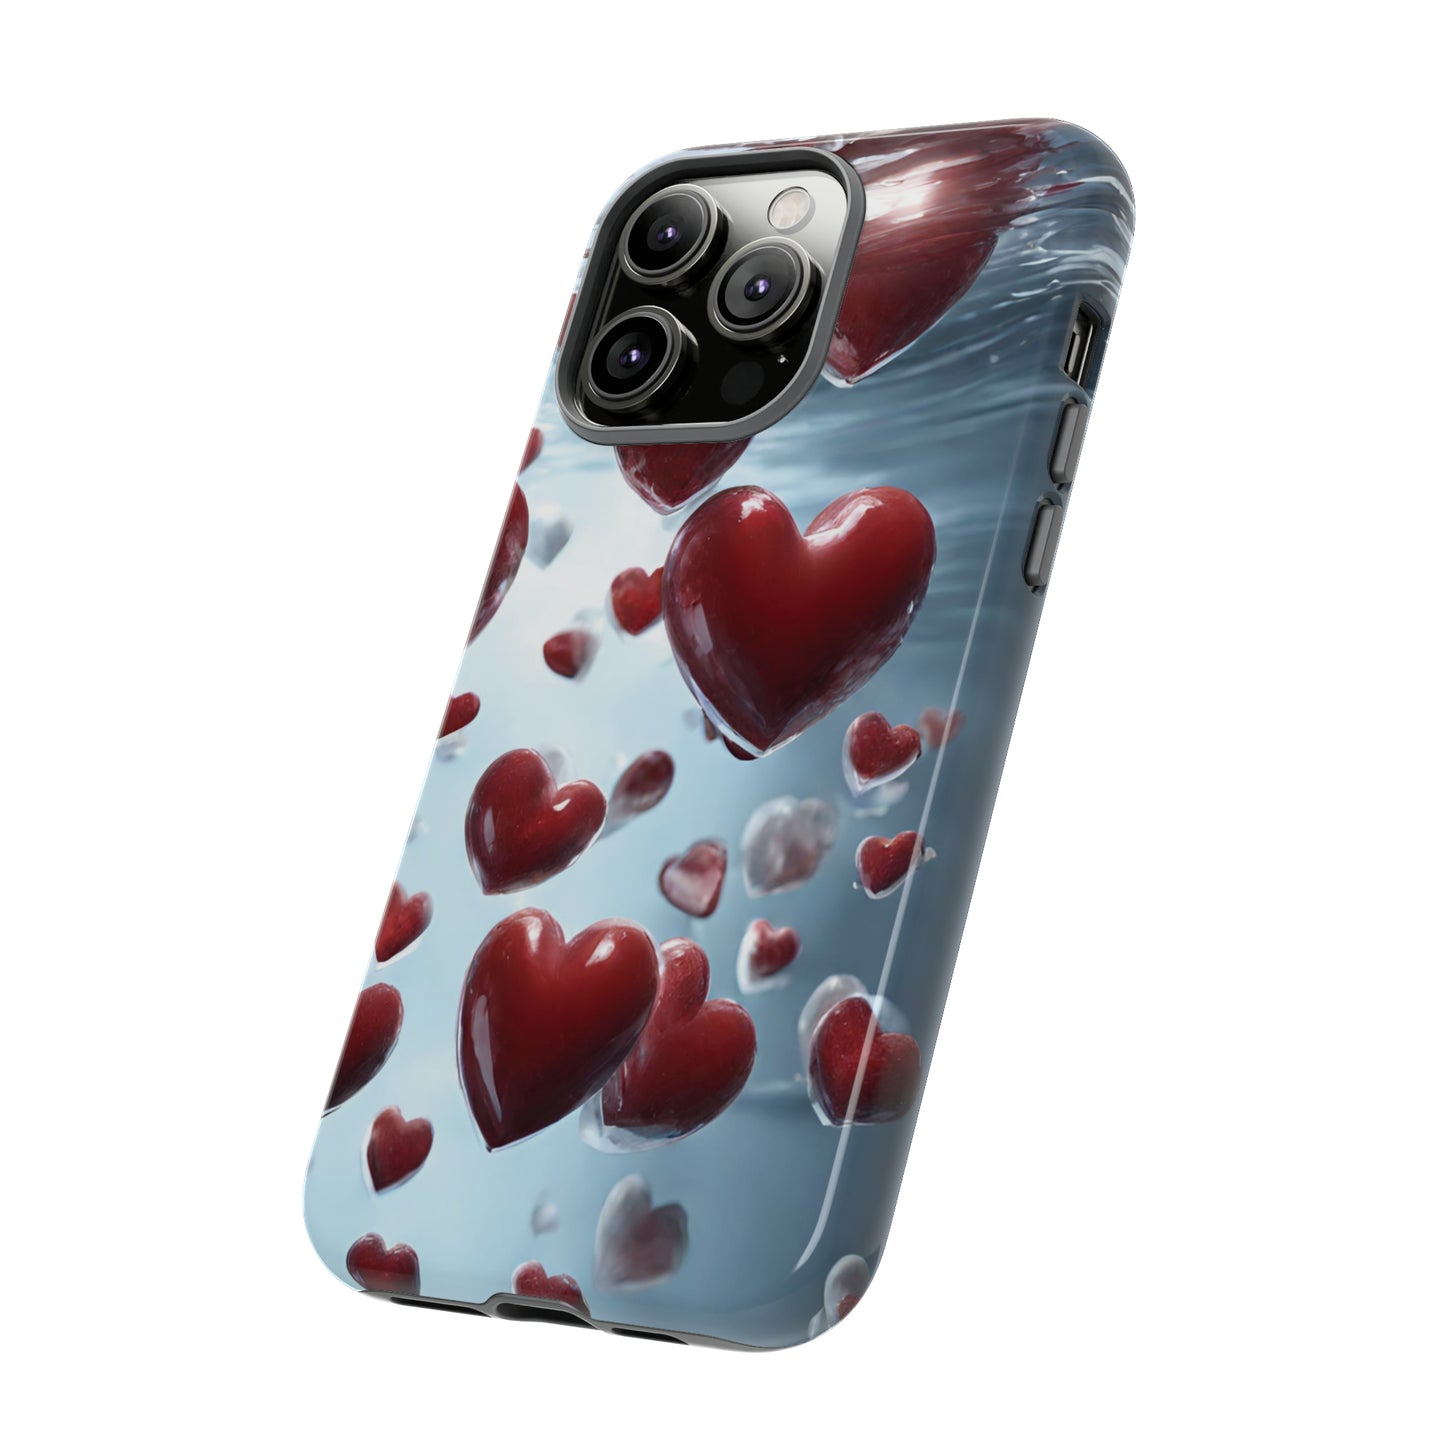 3D Red Heart iPhone Case Tough Cases